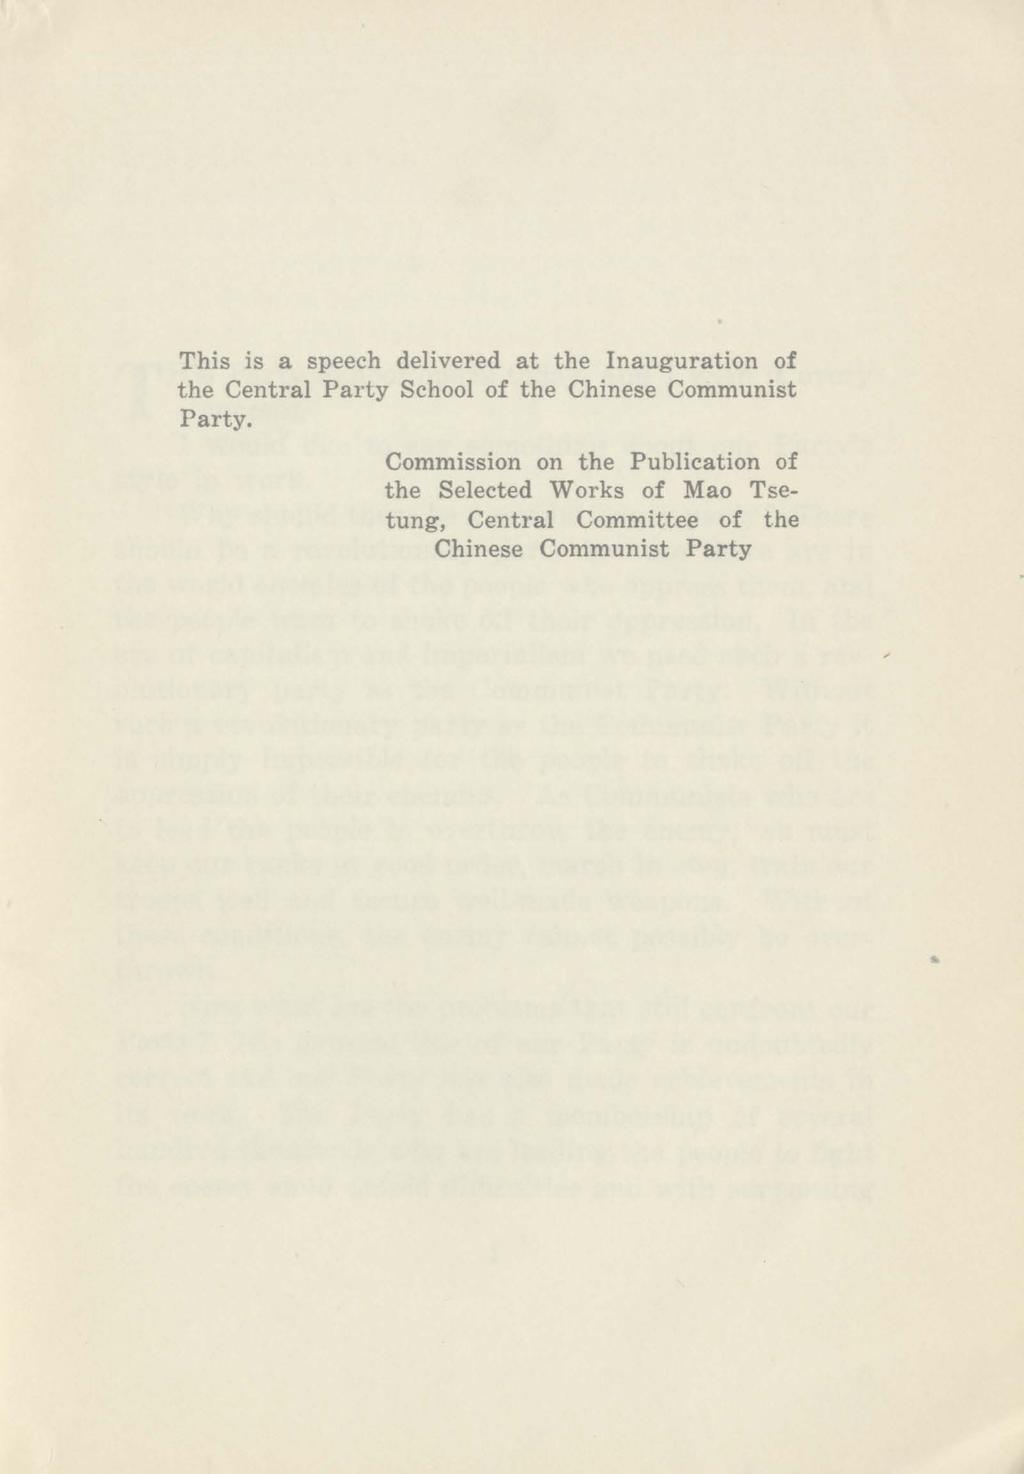 This is a speech delivered at the Inauguration of the Central Party School of the Chinese Communist Party.